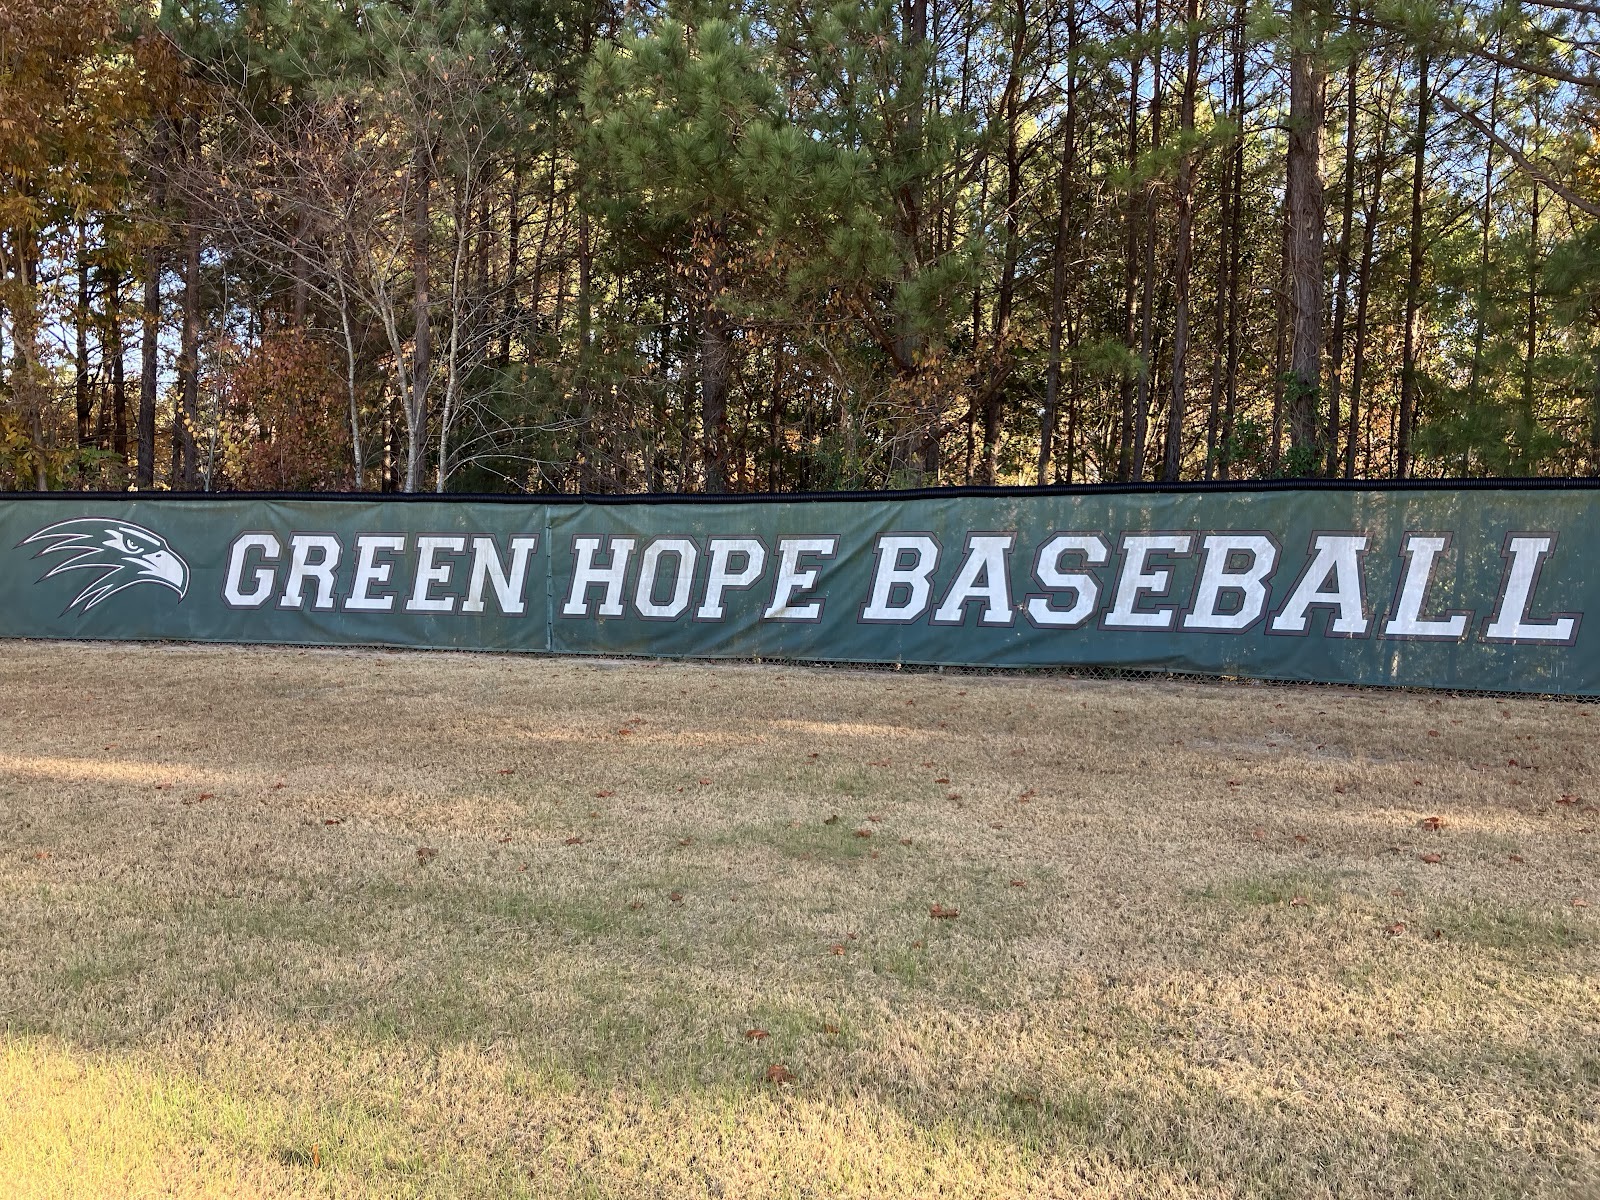 Green Hope baseball named Justin Reitz the varsity baseball coach after a college playing and coaching career.